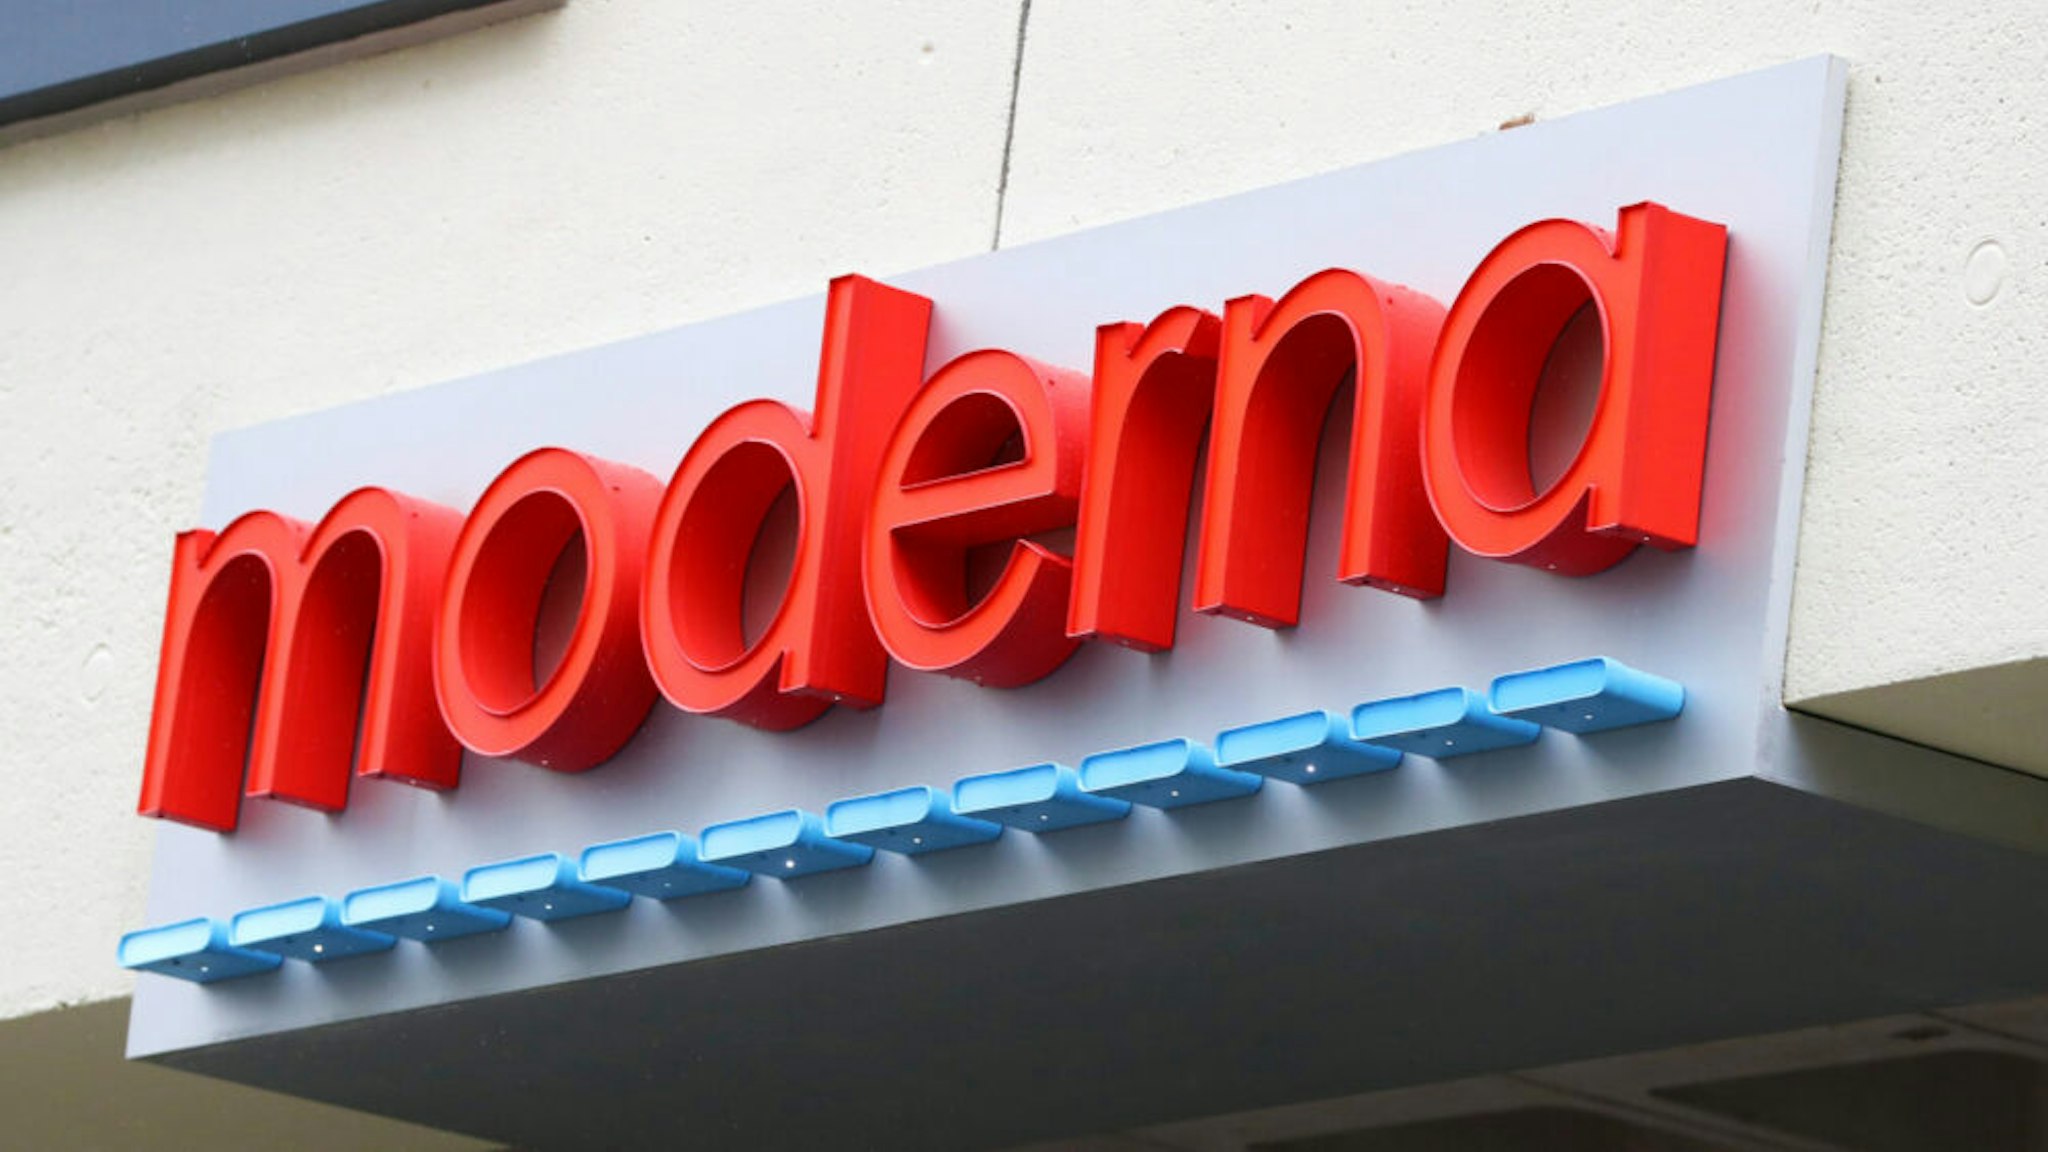 CAMBRIDGE, MASSACHUSETTS - NOVEMBER 30: The Moderna headquarters is seen on November 30, 2020 in Cambridge, Massachusetts. Moderna has applied for FDA approval to authorize its COVID-19 vaccine for emergency use.